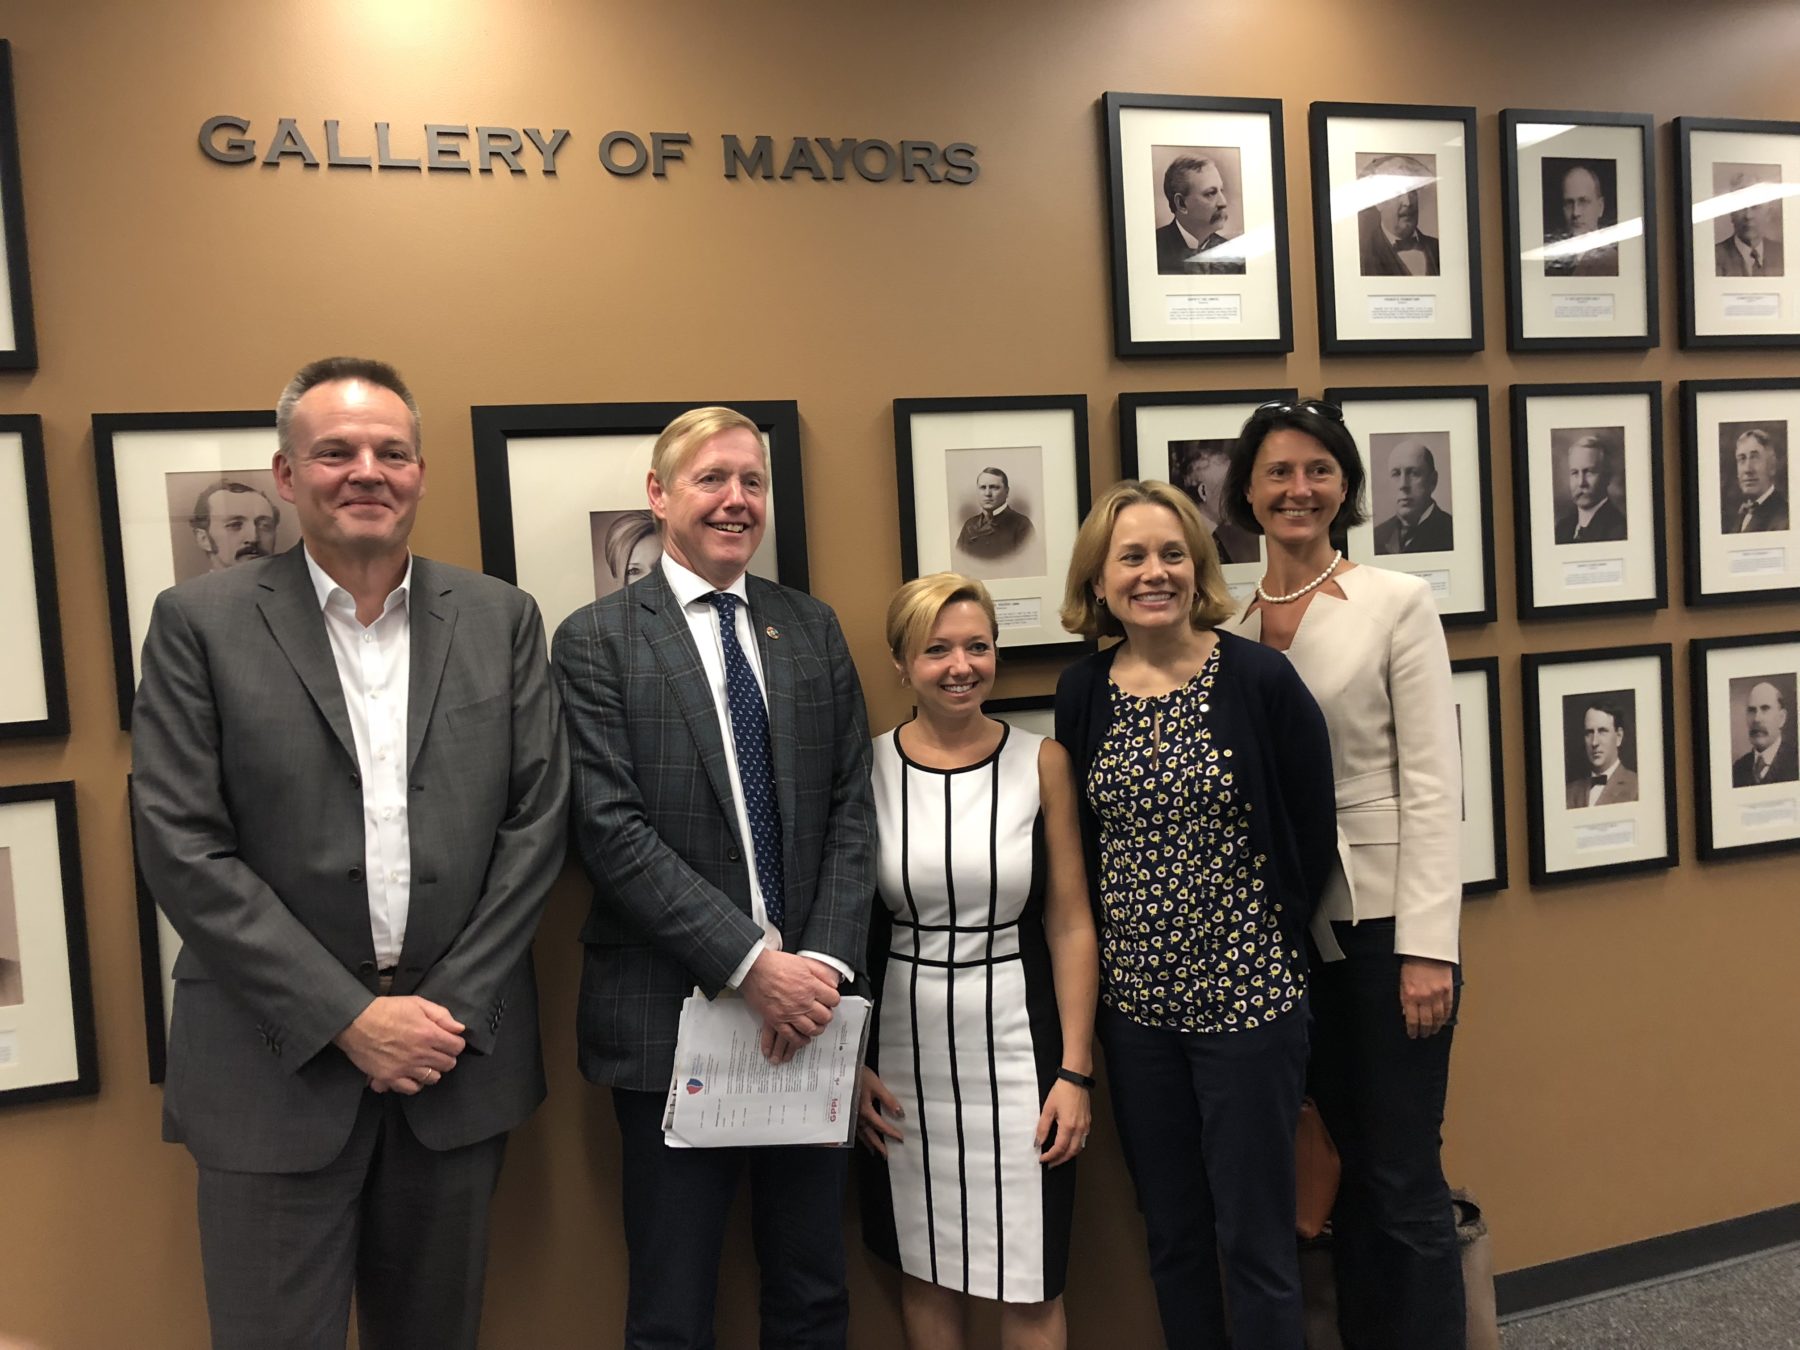 (From Left) Markus Lux, Amb. Aas, Mayor Bliss, Julie Smith, and Kadri Liik are all smiles in front of Grand Rapids City Hall’s Gallery of Mayors